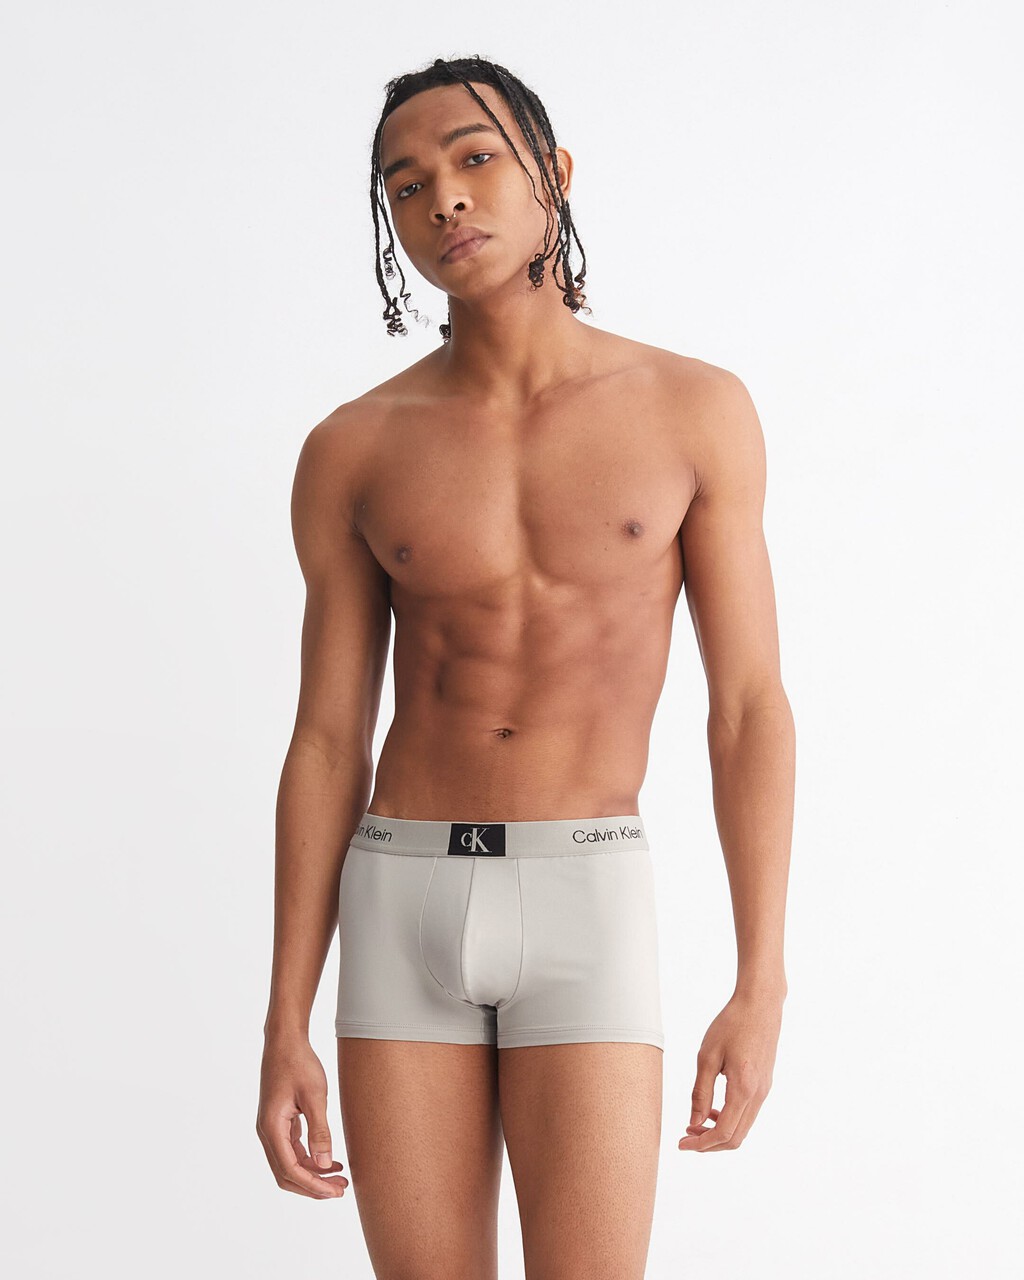 CALVIN KLEIN 1996 MICRO LOW RISE TRUNKS, Authentic Grey, hi-res